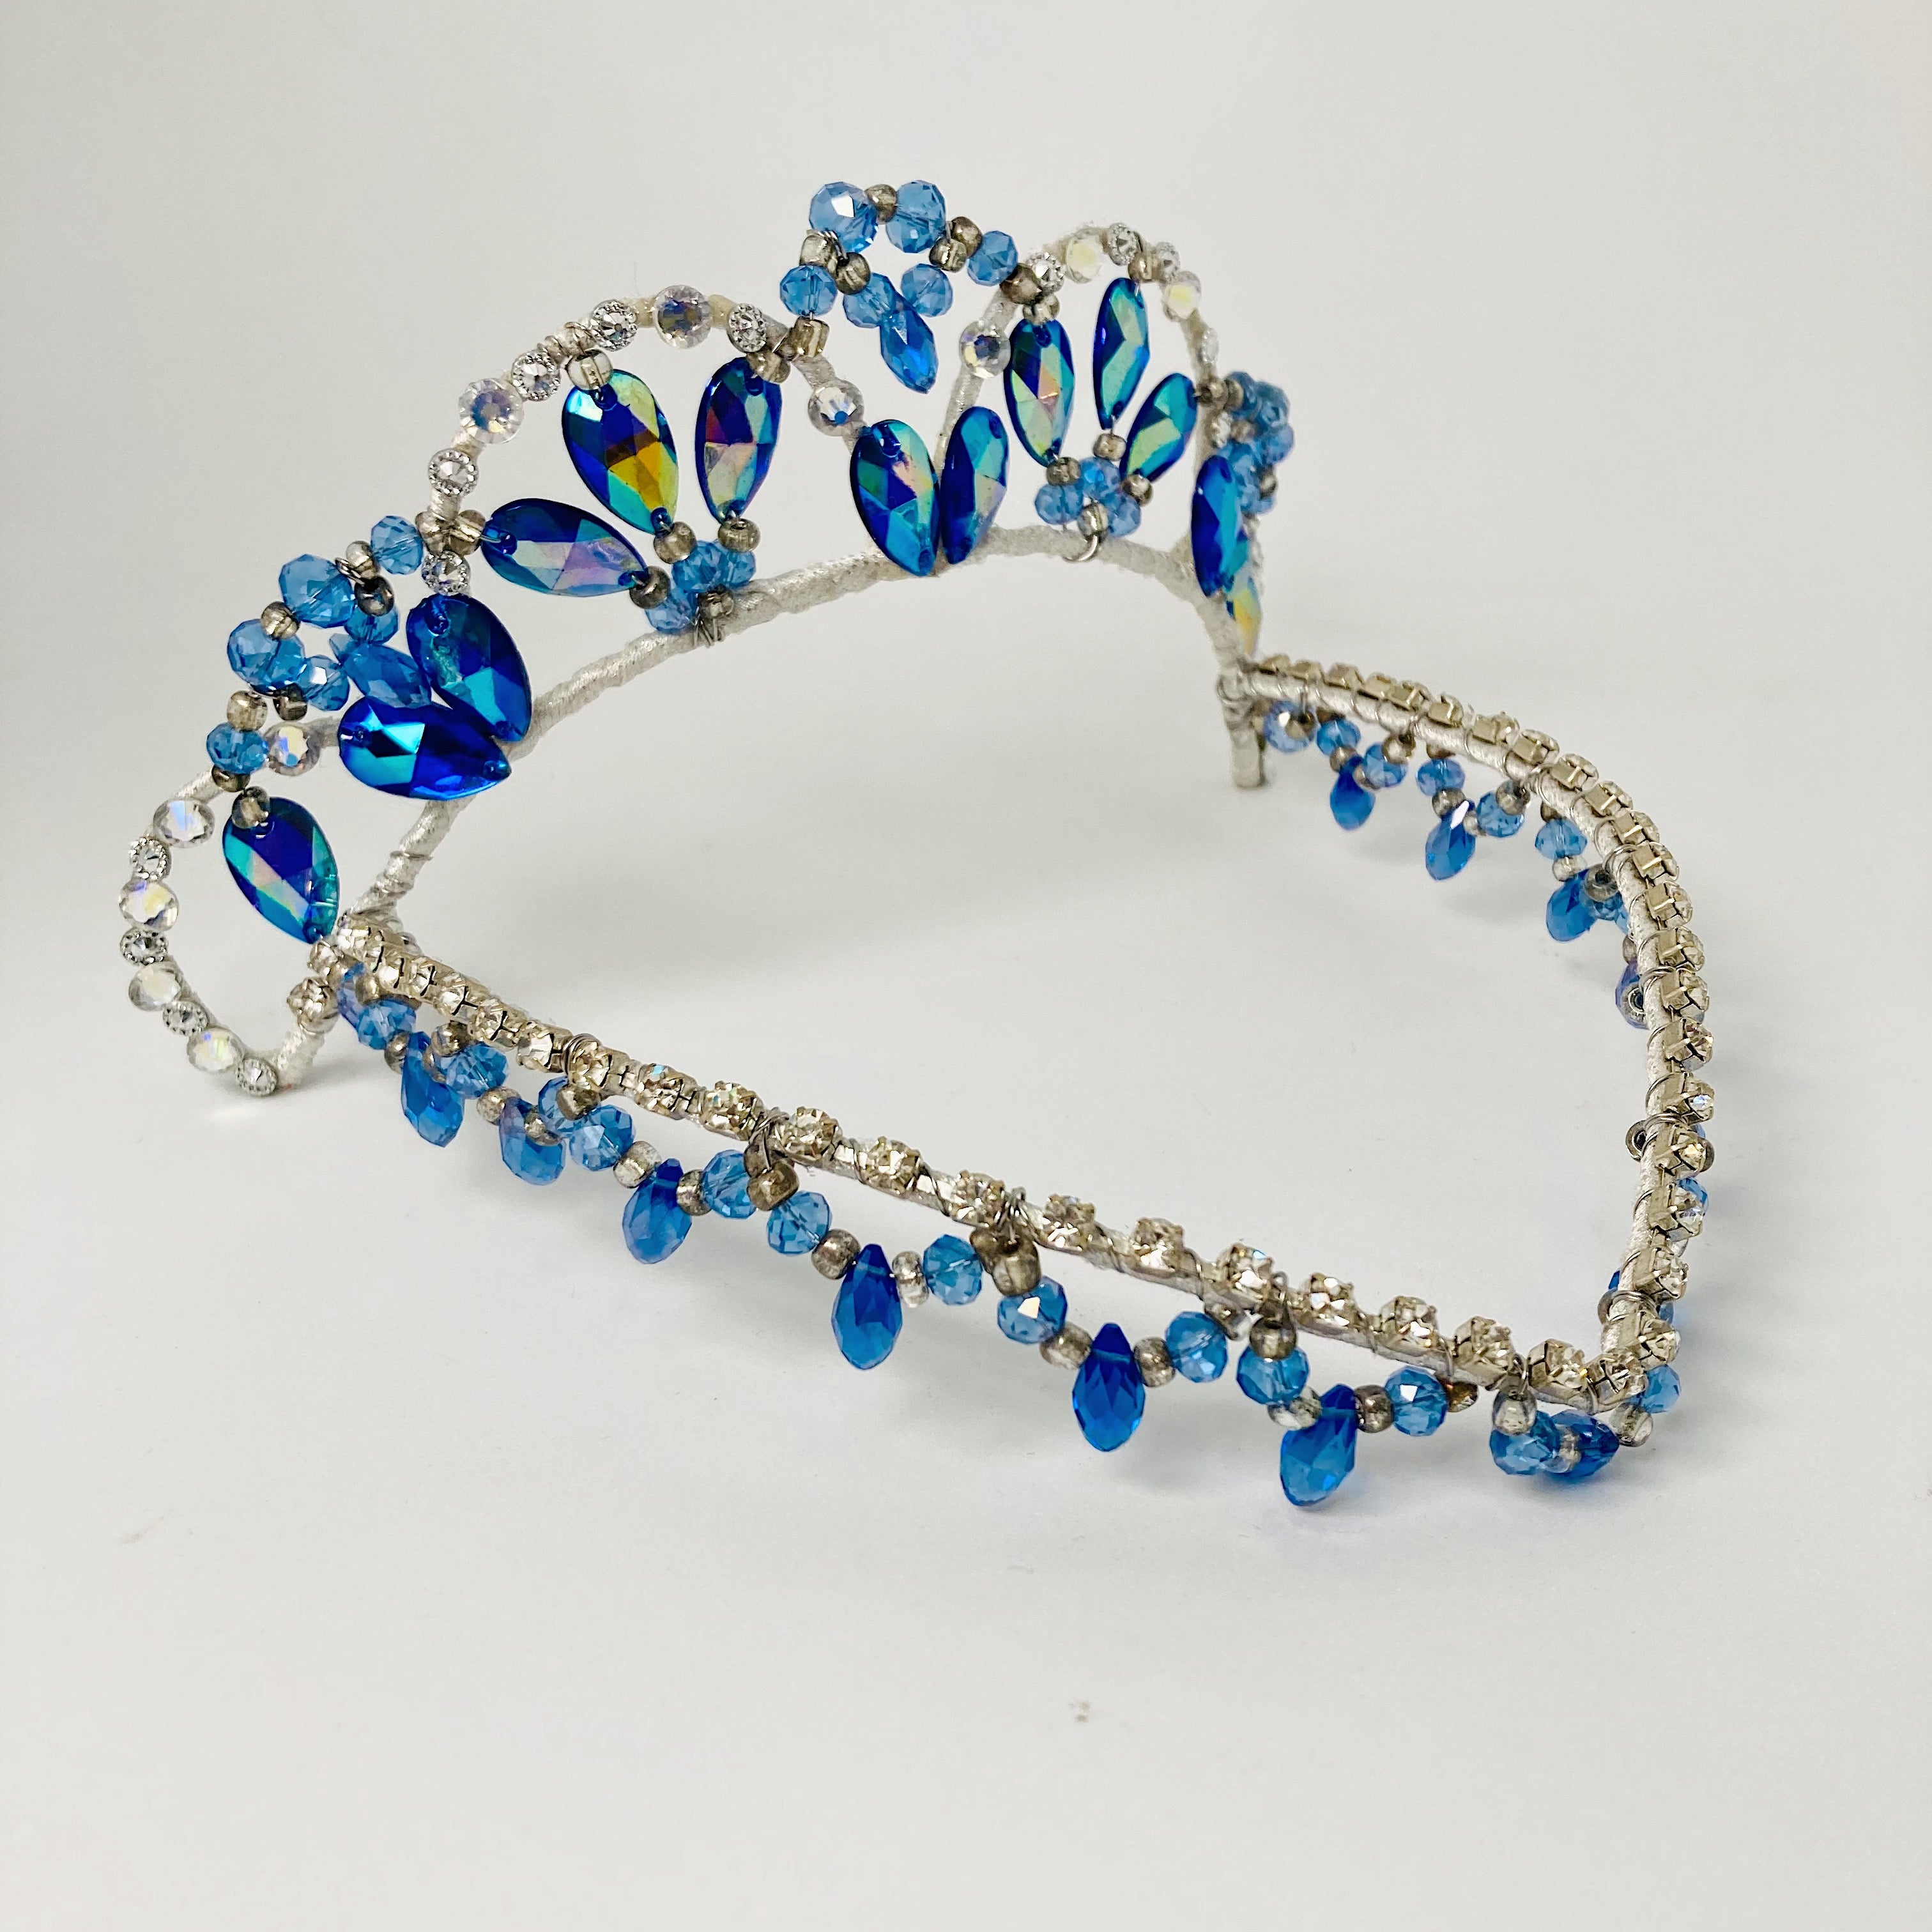 Front view of blue and silver tiara featuring blue AB crystals and a v shaped forehead piece embellished with rhinestones and fringed with blue drop beads. 